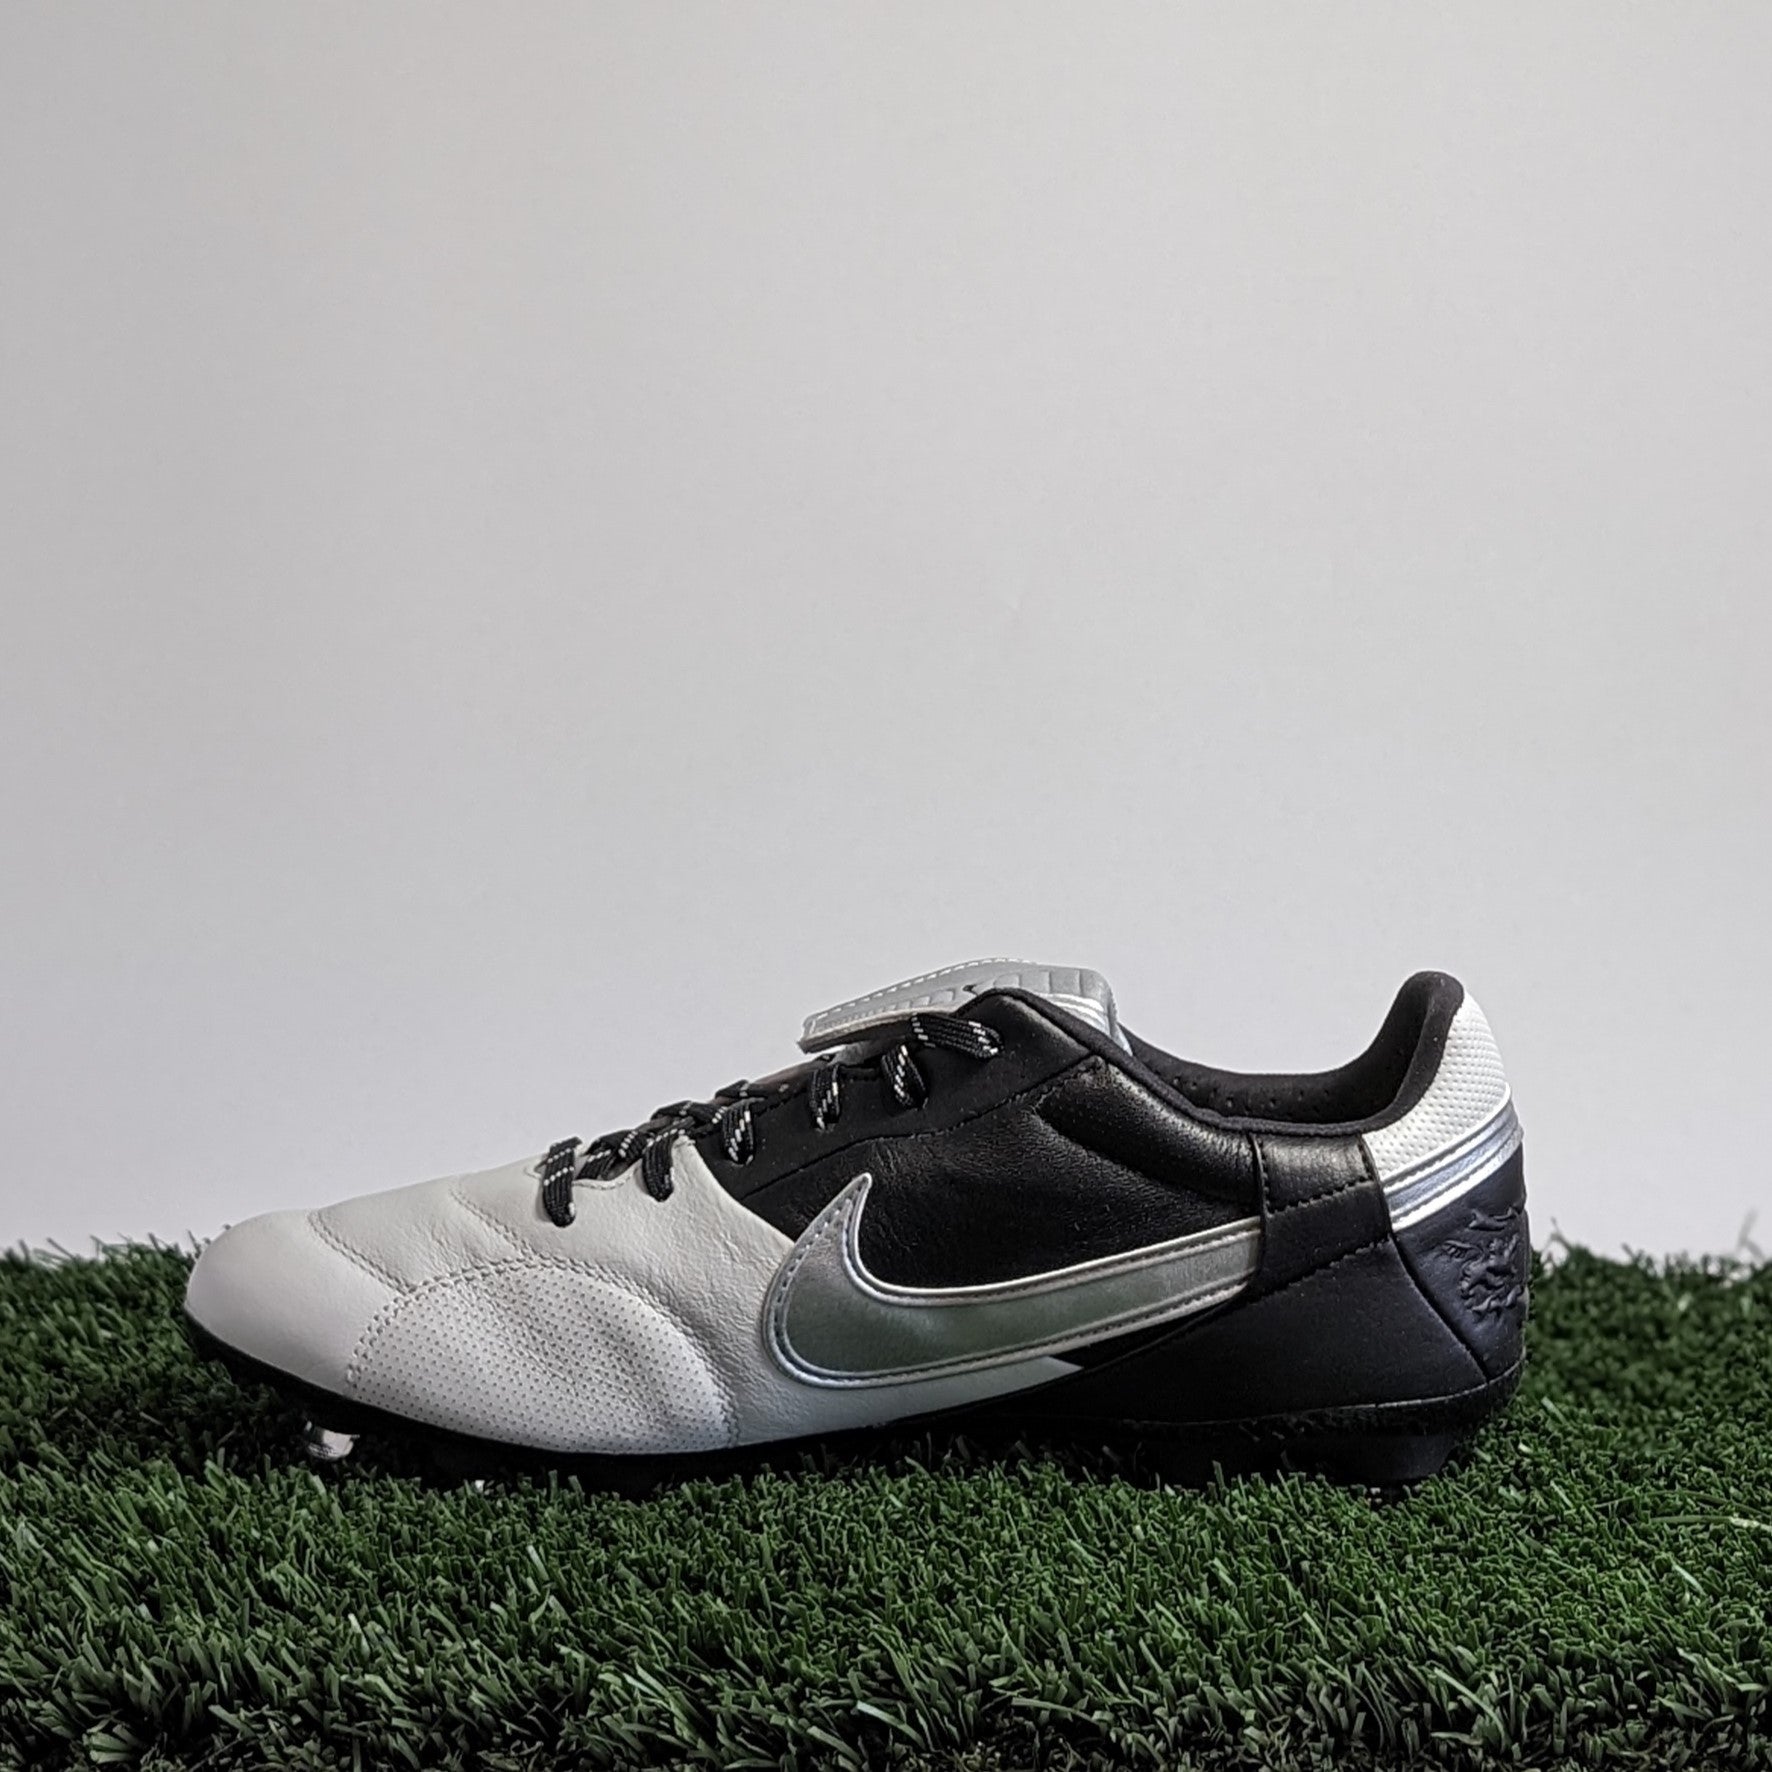 The Nike Premier III FG - AT5889-006